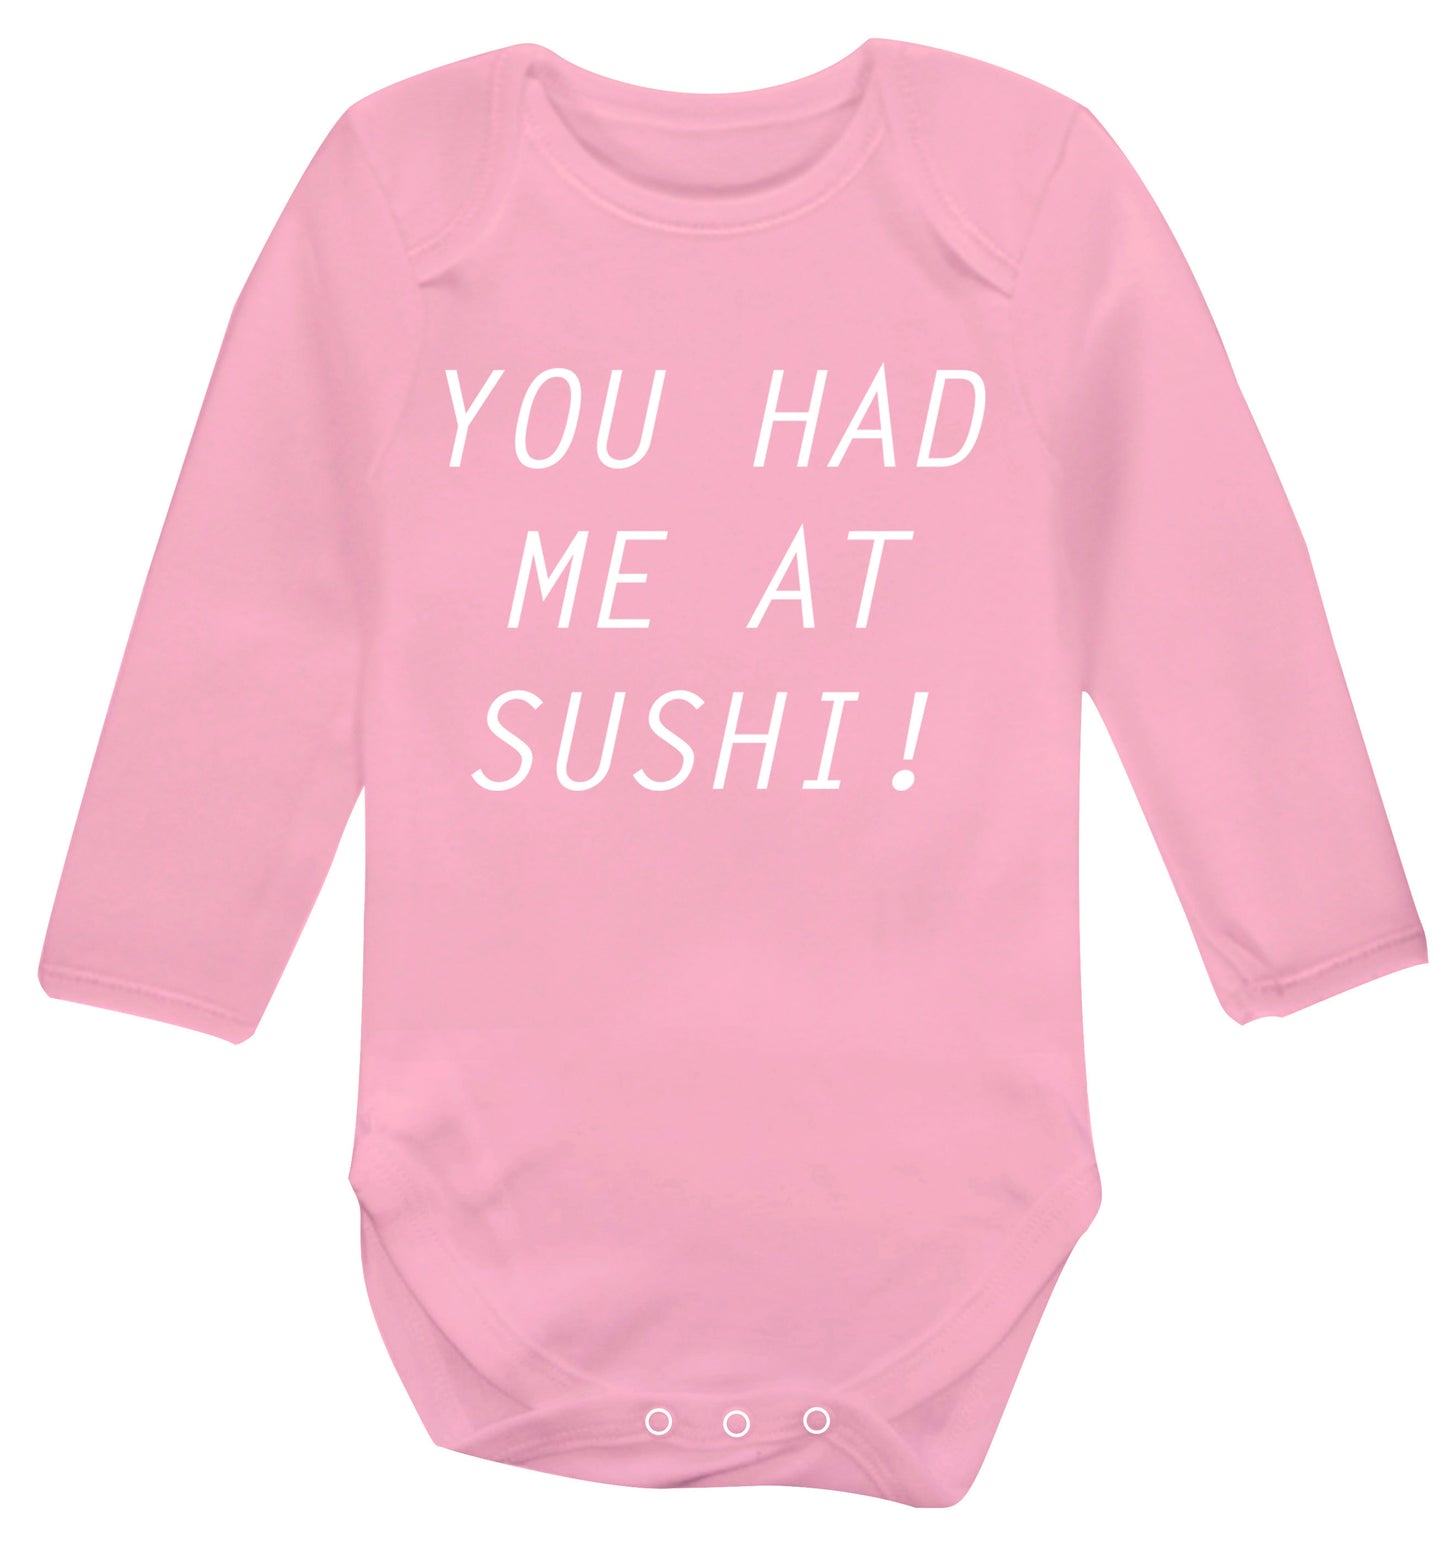 You had me at sushi Baby Vest long sleeved pale pink 6-12 months